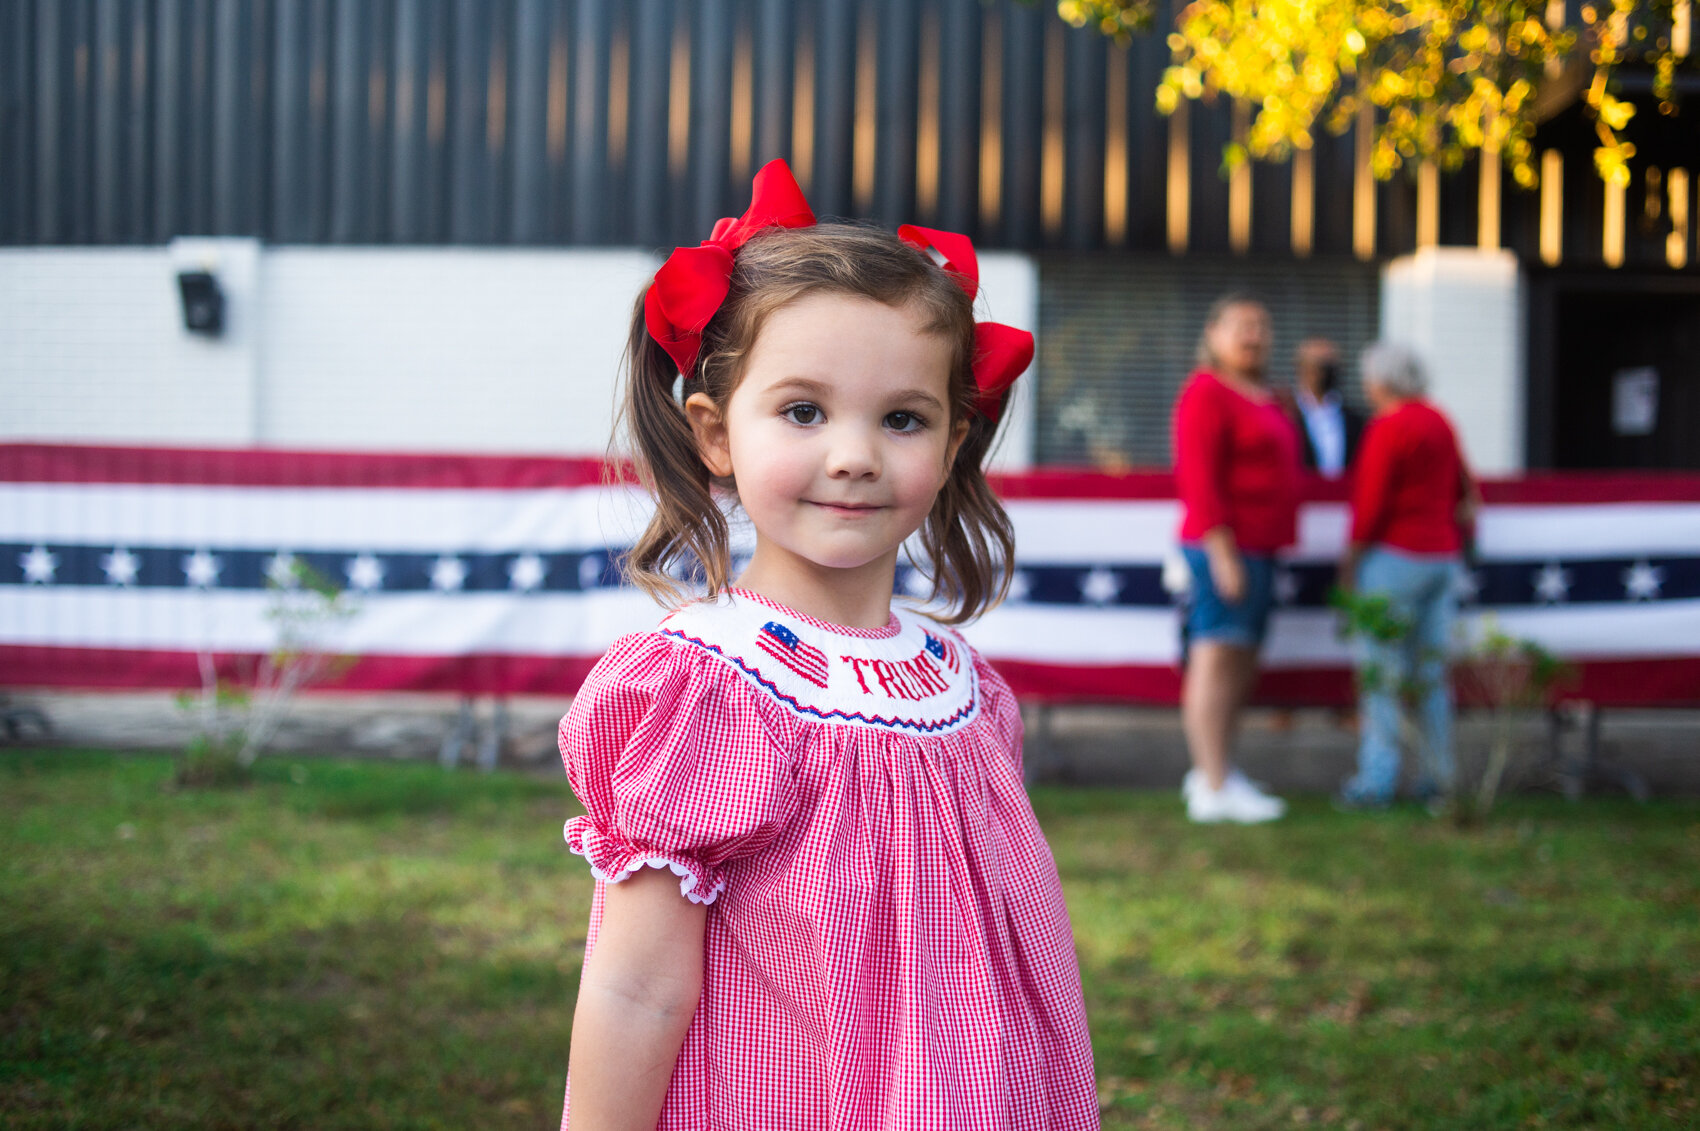  A young girl attends a rally hosted by Lara Trump to encourage voters to re-elect her father-in-law, Donald Trump.  